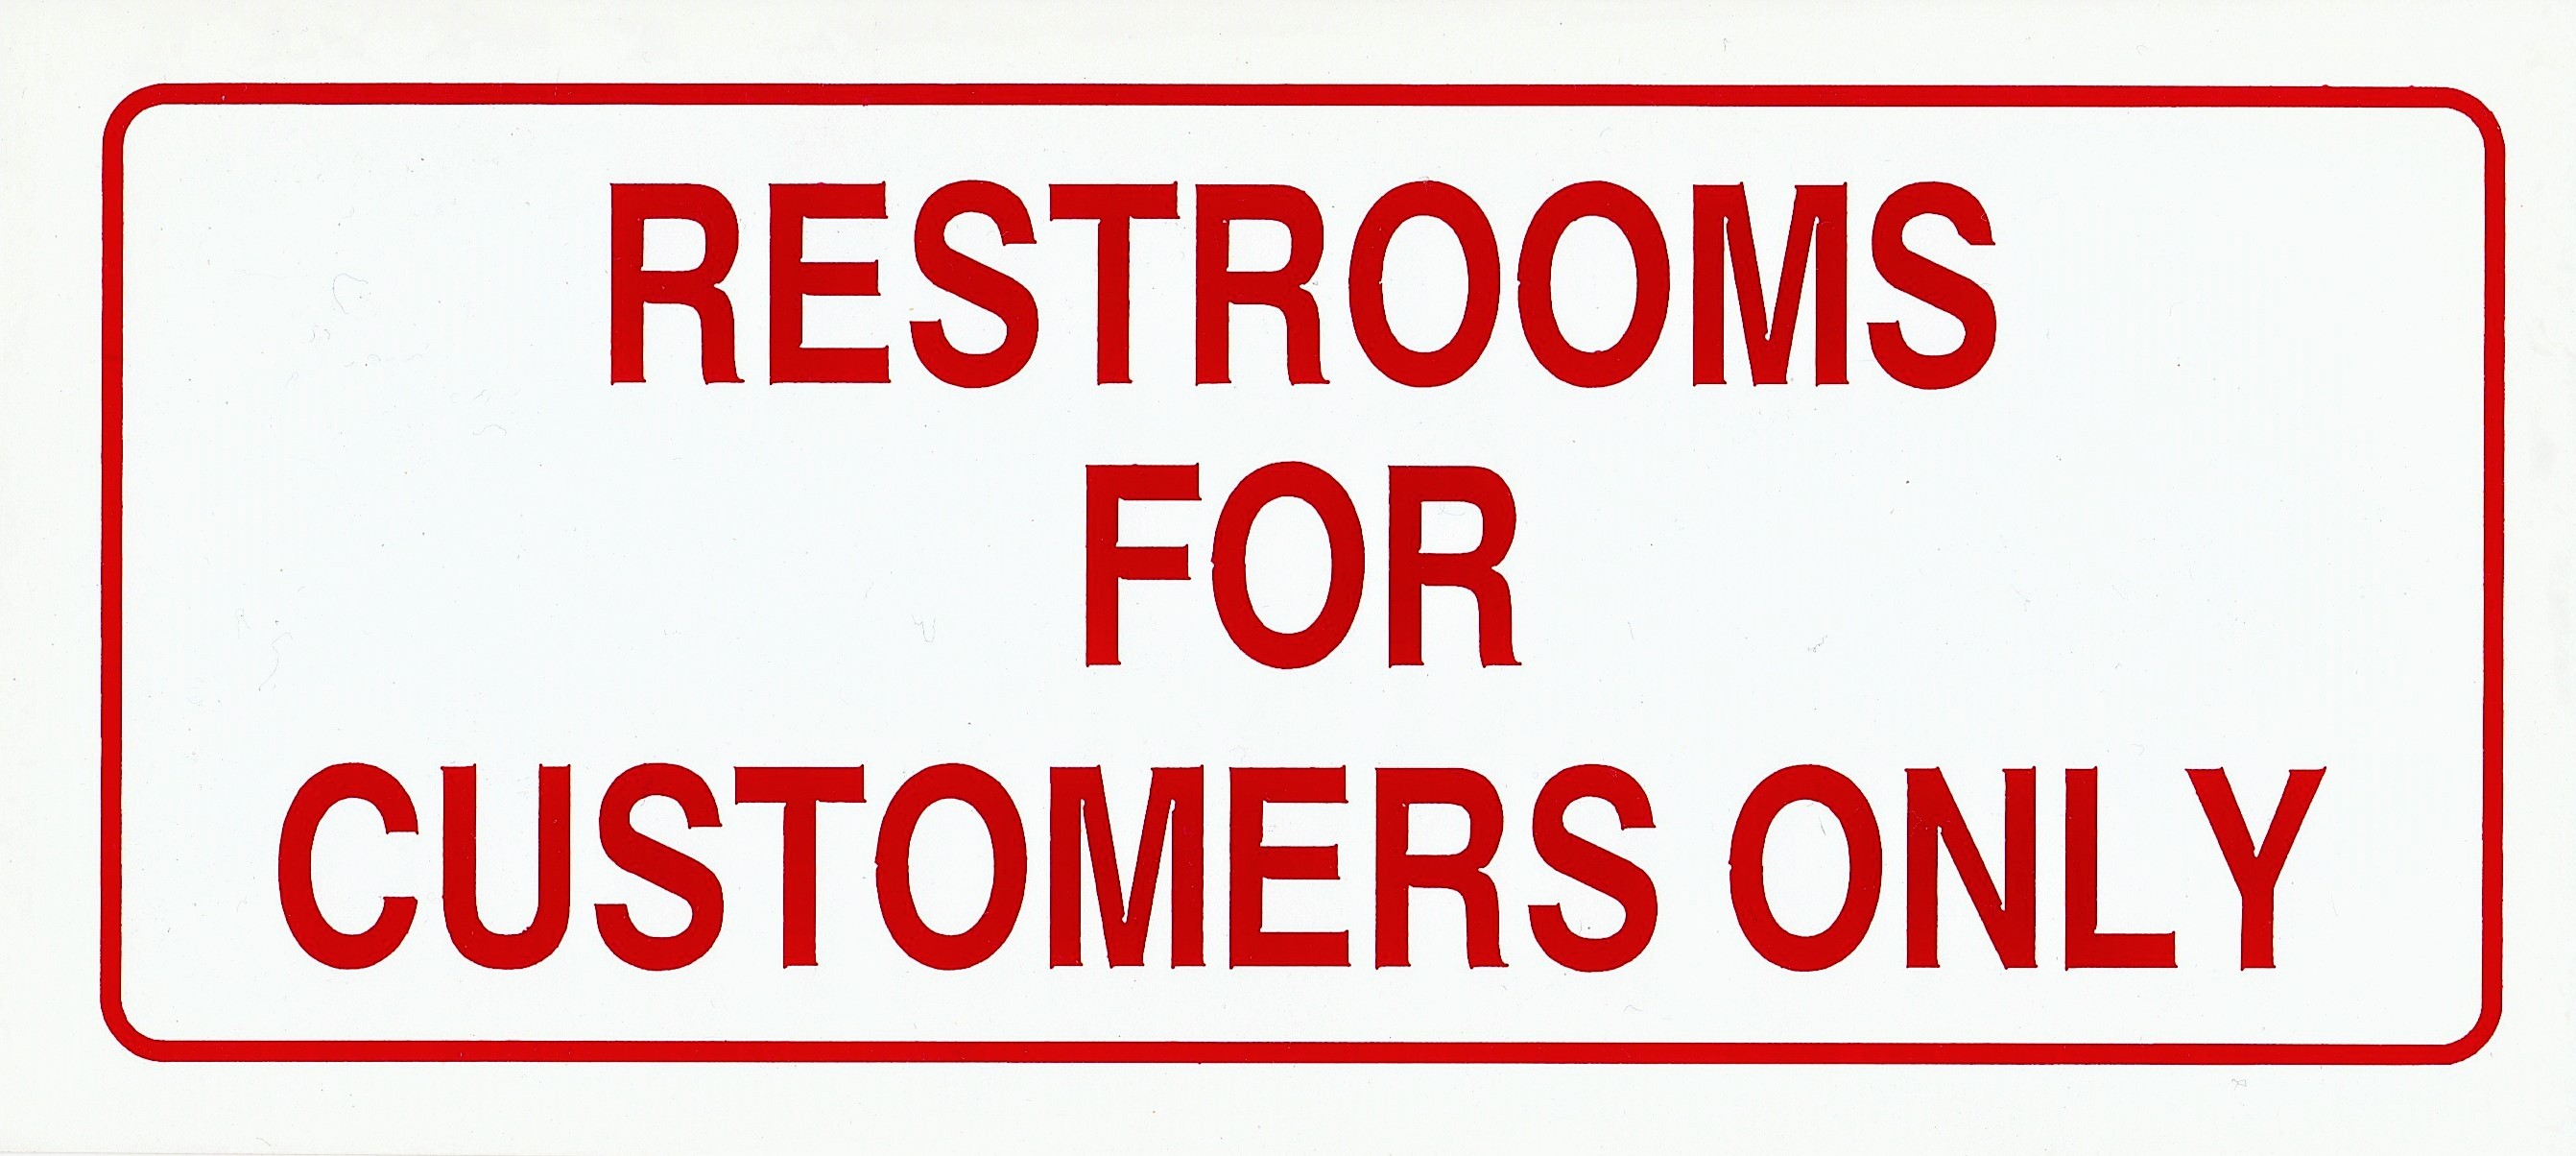 Restrooms For Customers Only Sign